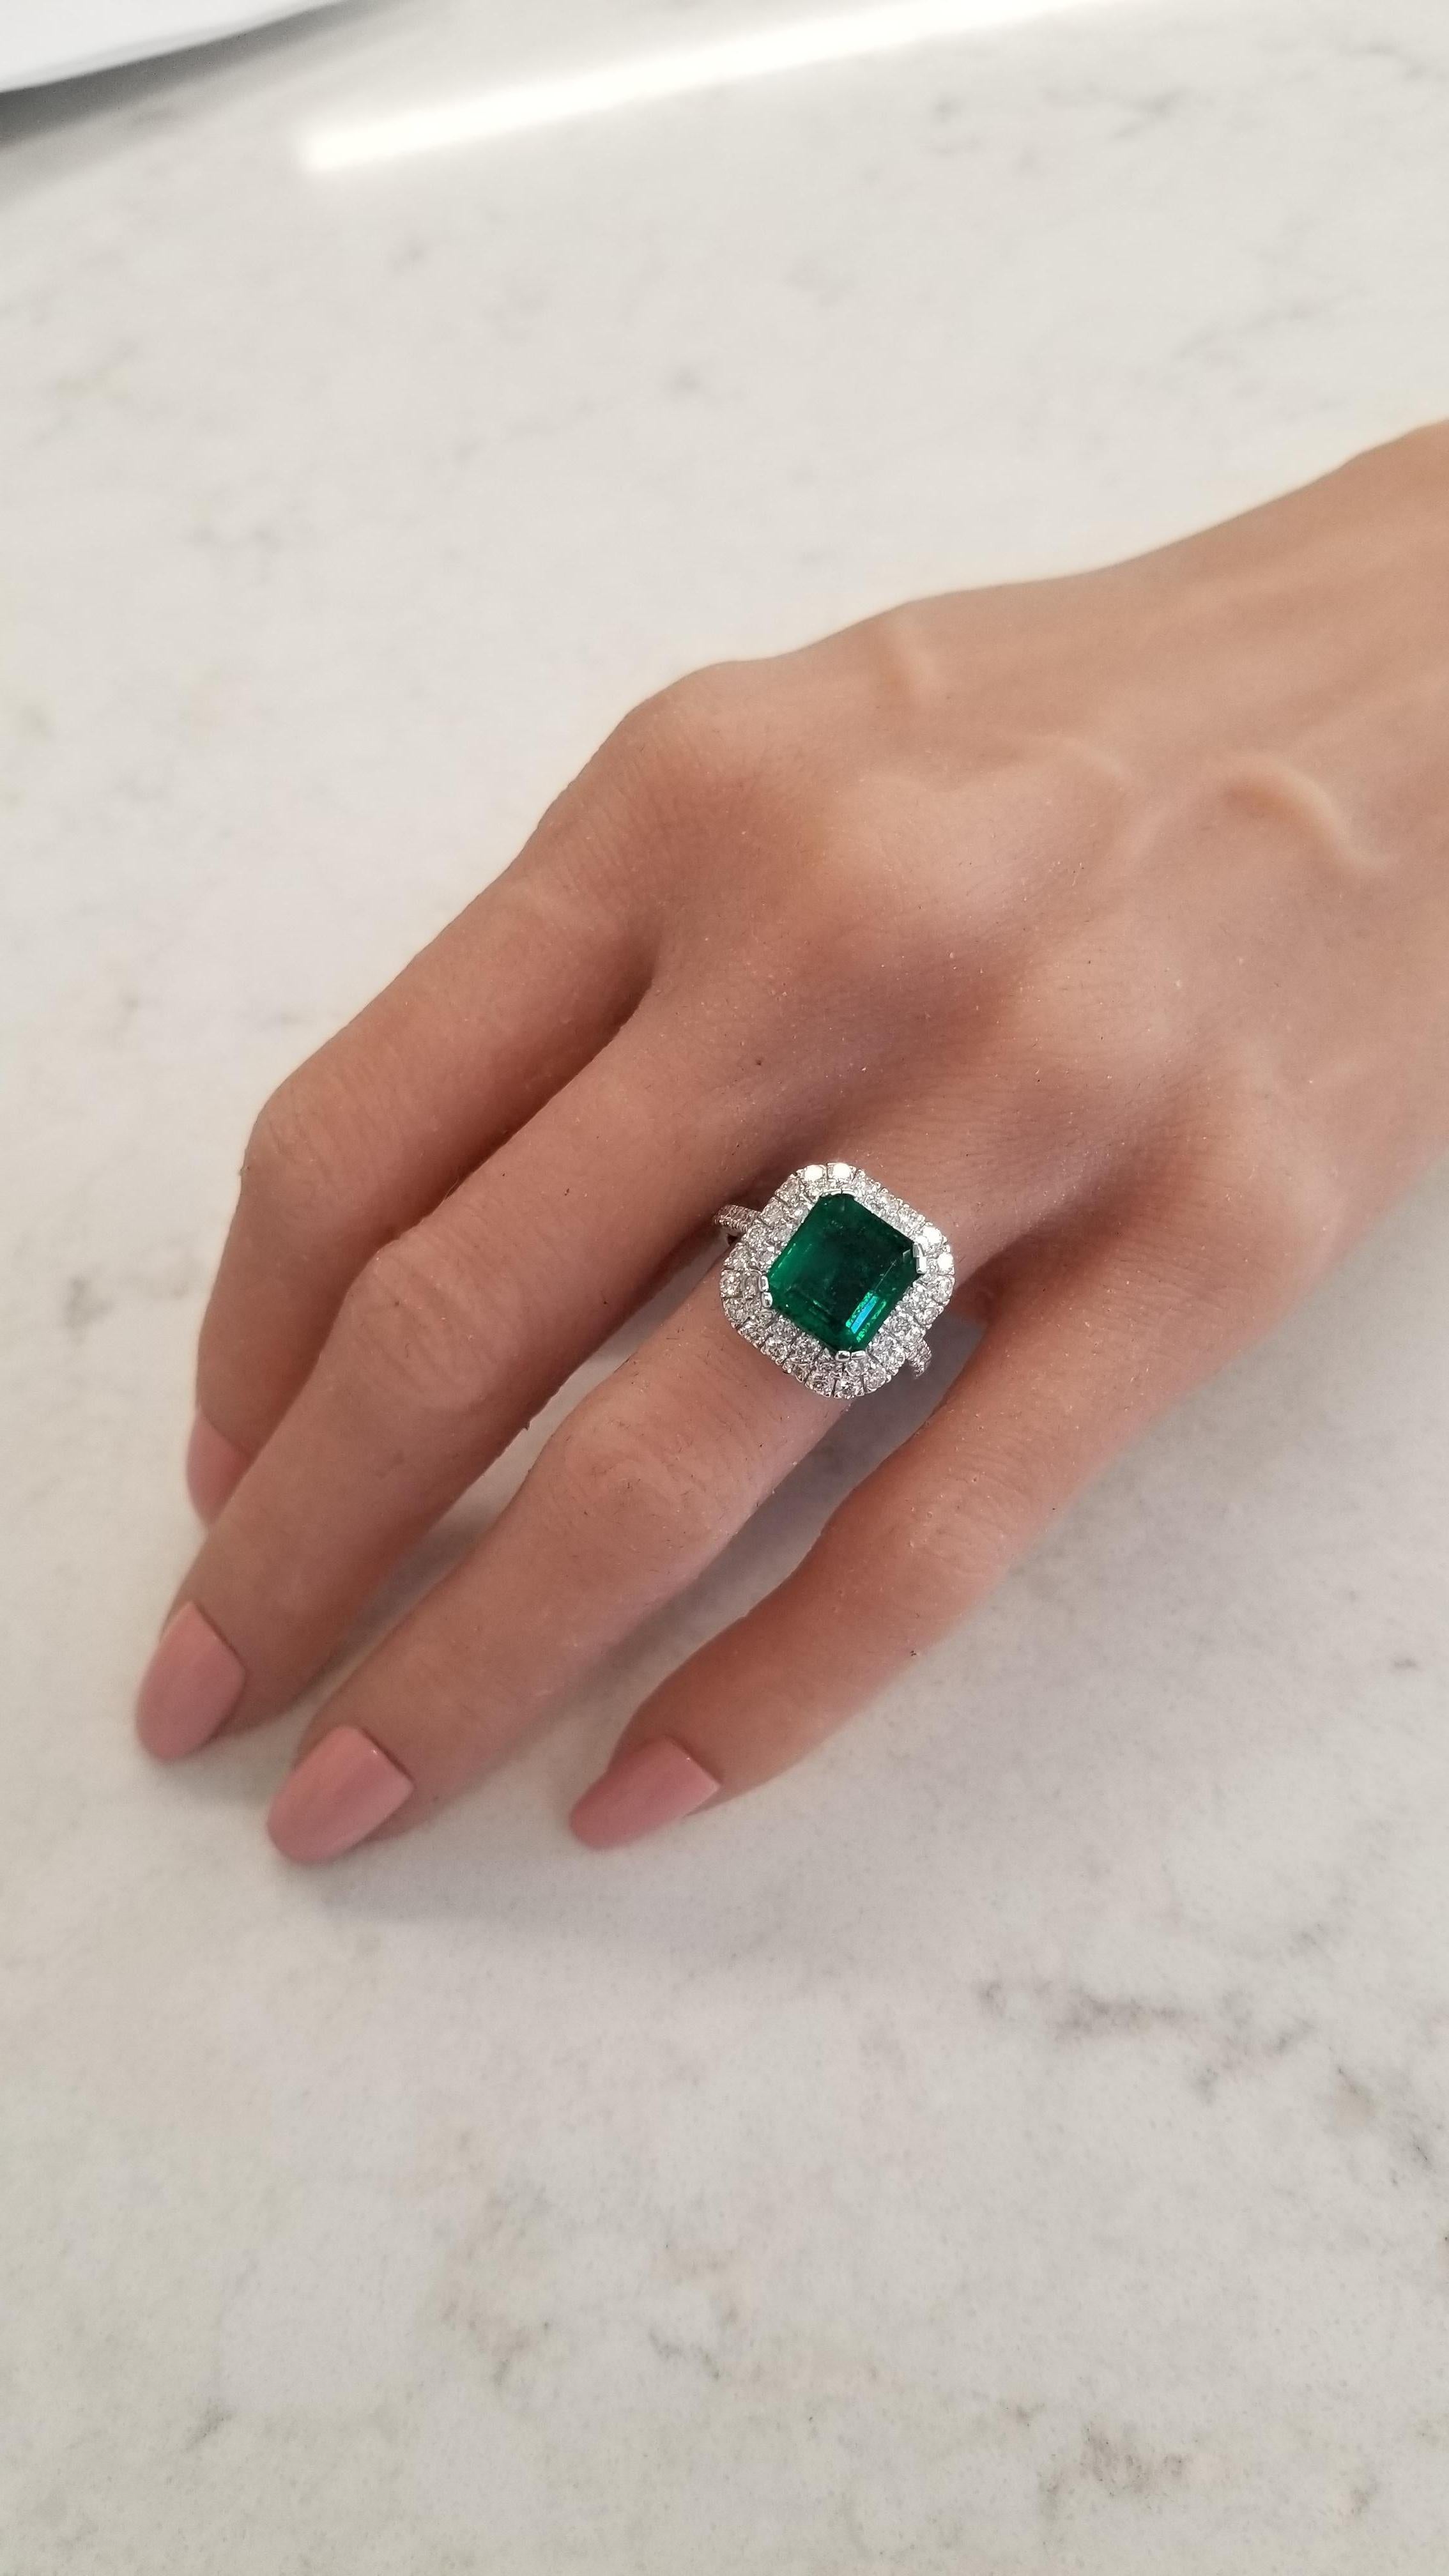 This is a 4.09 cushion cut intense green emerald that measures 10.10 x 9.10mm. The gem source is Colombia; its color is vibrant grass green. Its transparency and luster are excellent. Sparkling round brilliant cut diamonds frame this gem in a